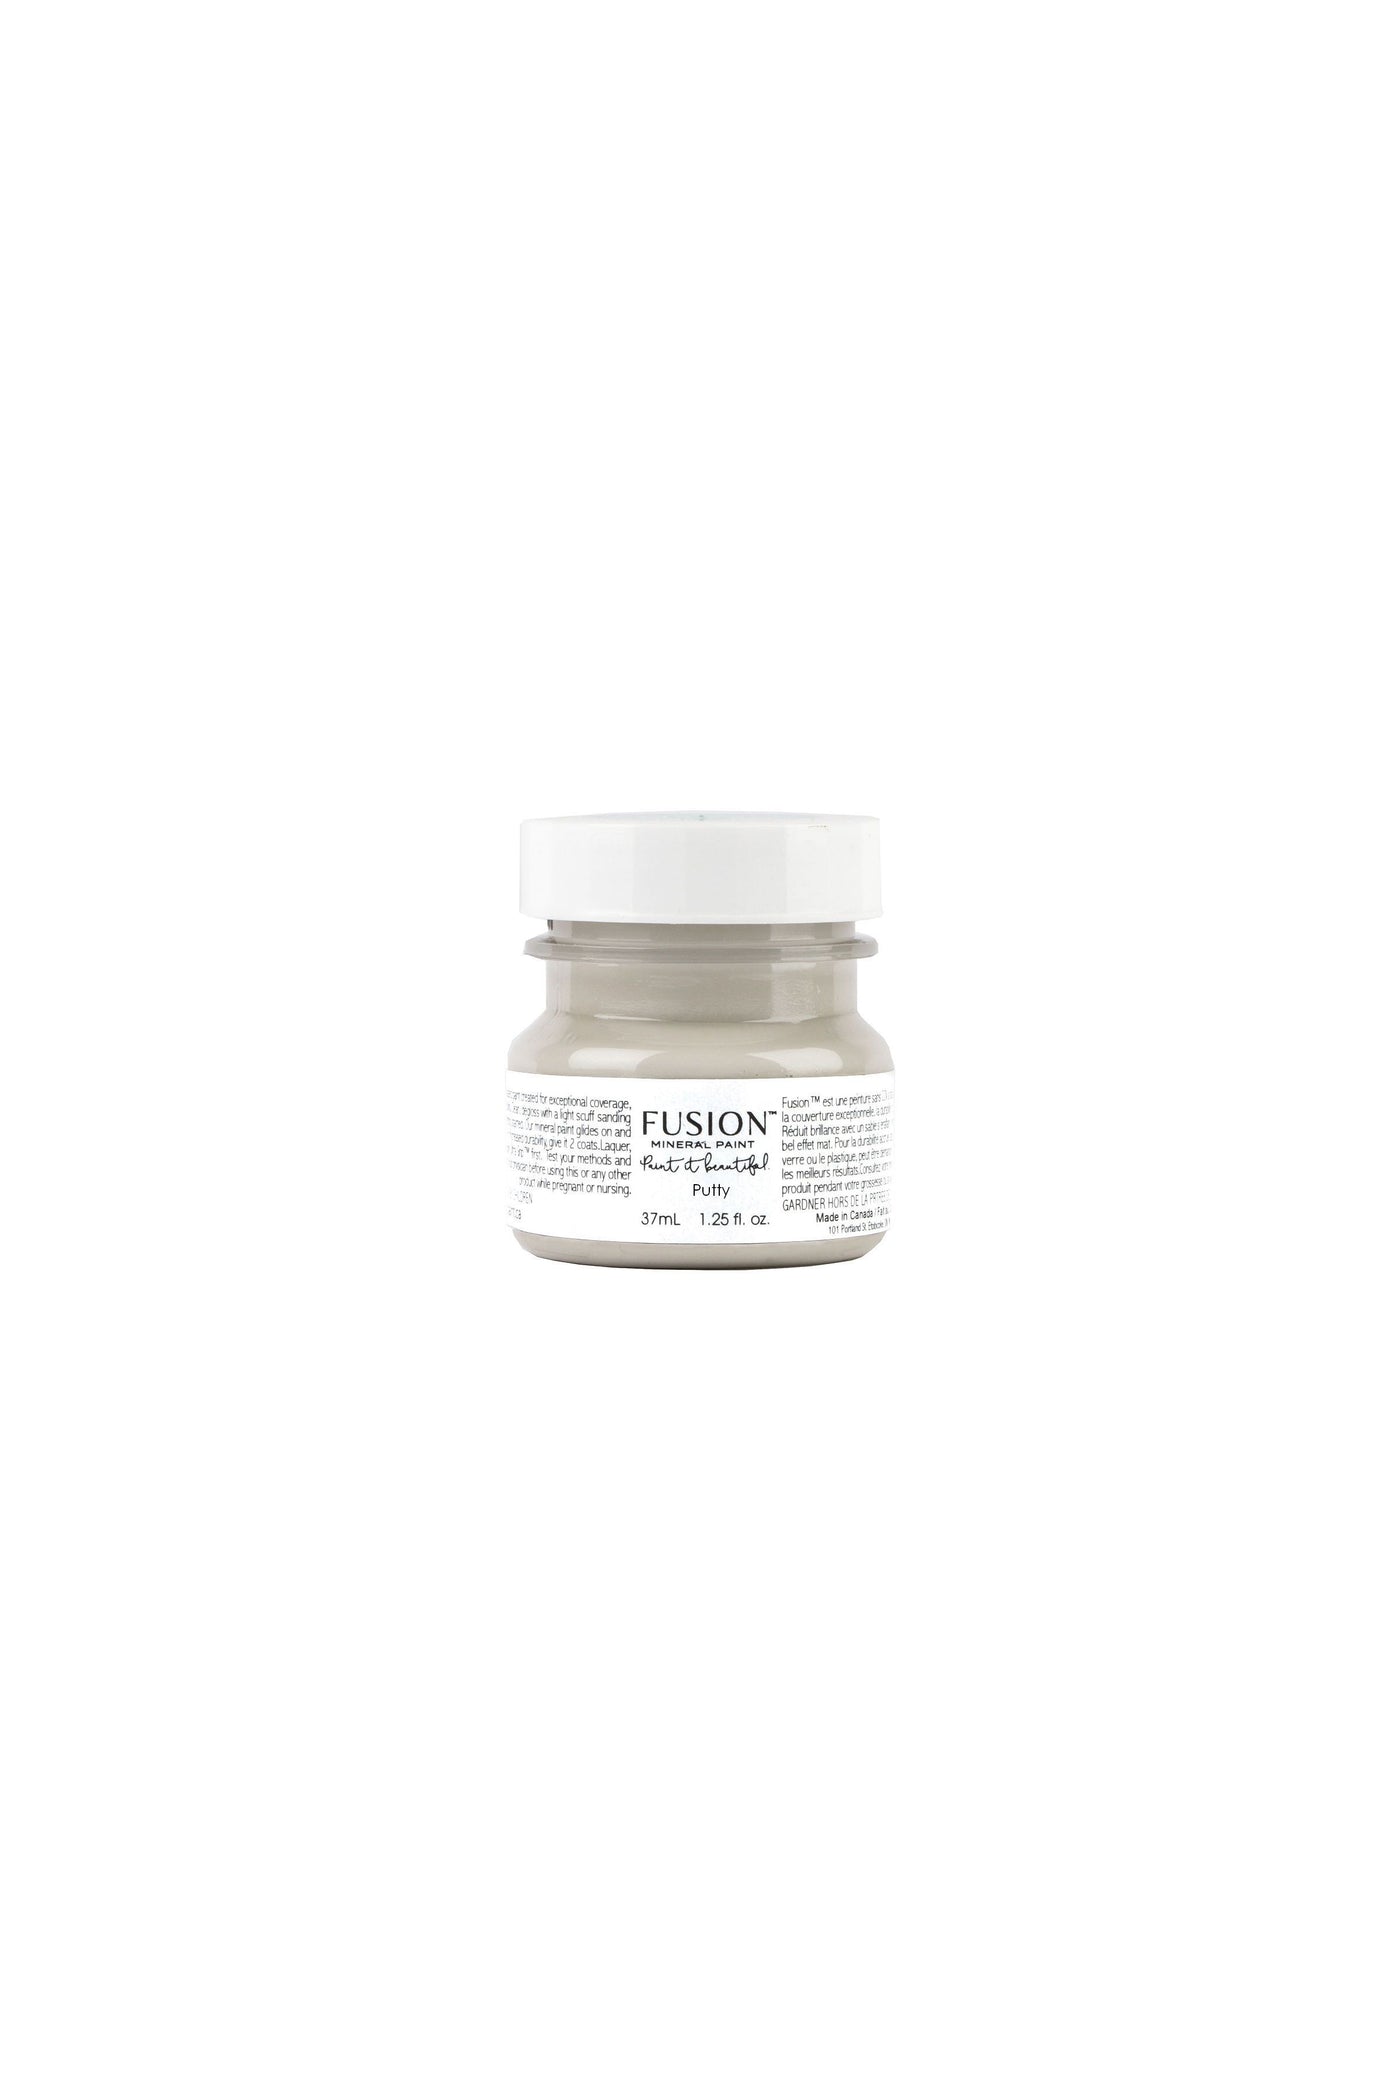 Fusion Mineral Paint - PUTTY pale neutral beige grey 37ml Tester